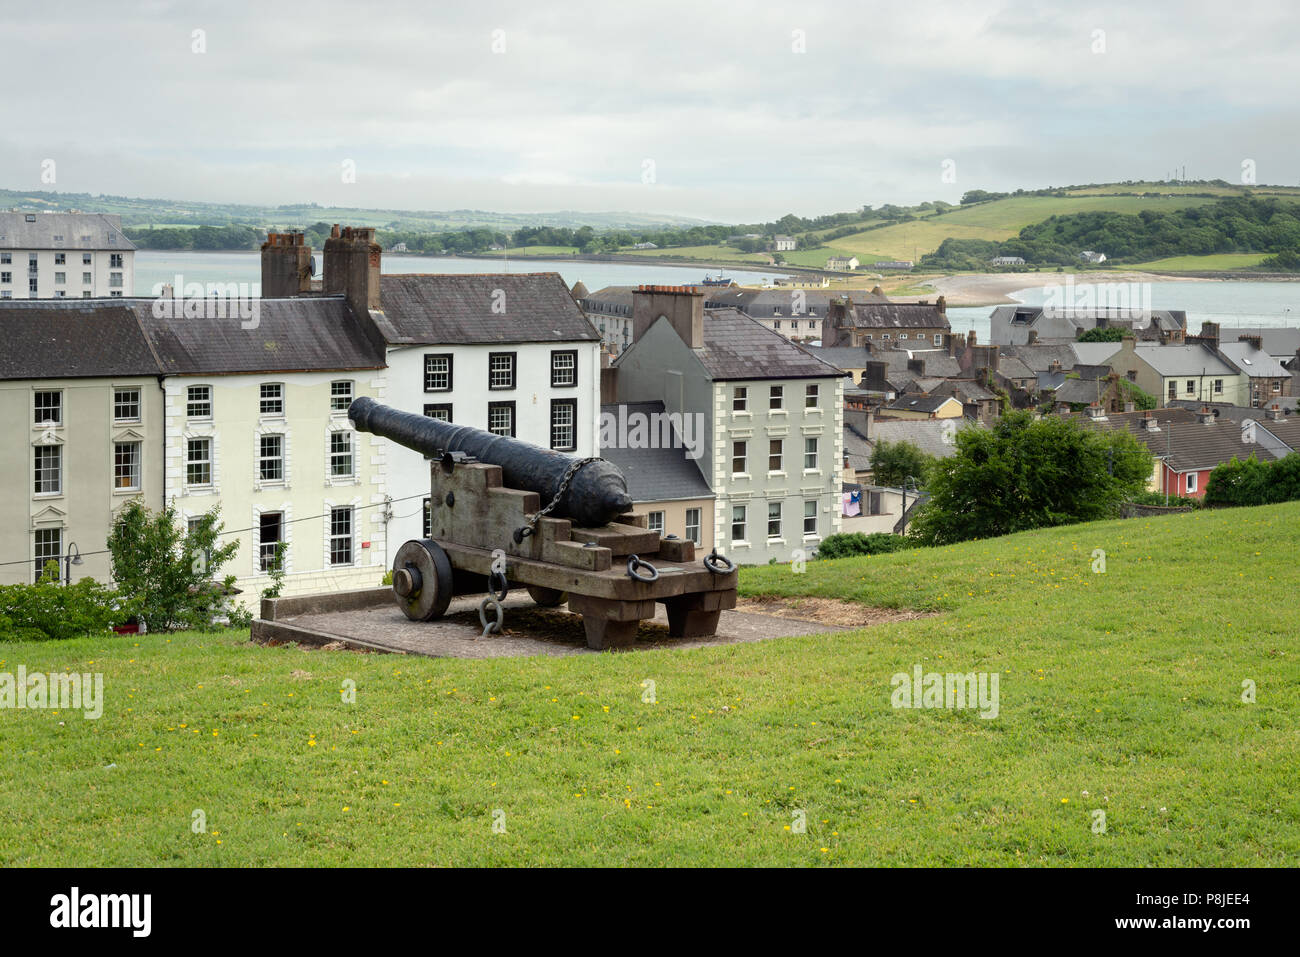 Youghal, Ireland. An Old Gun Cannon located at College Gardens in the Raleigh Quarter, overlooking the town and the River Blackwater. Stock Photo